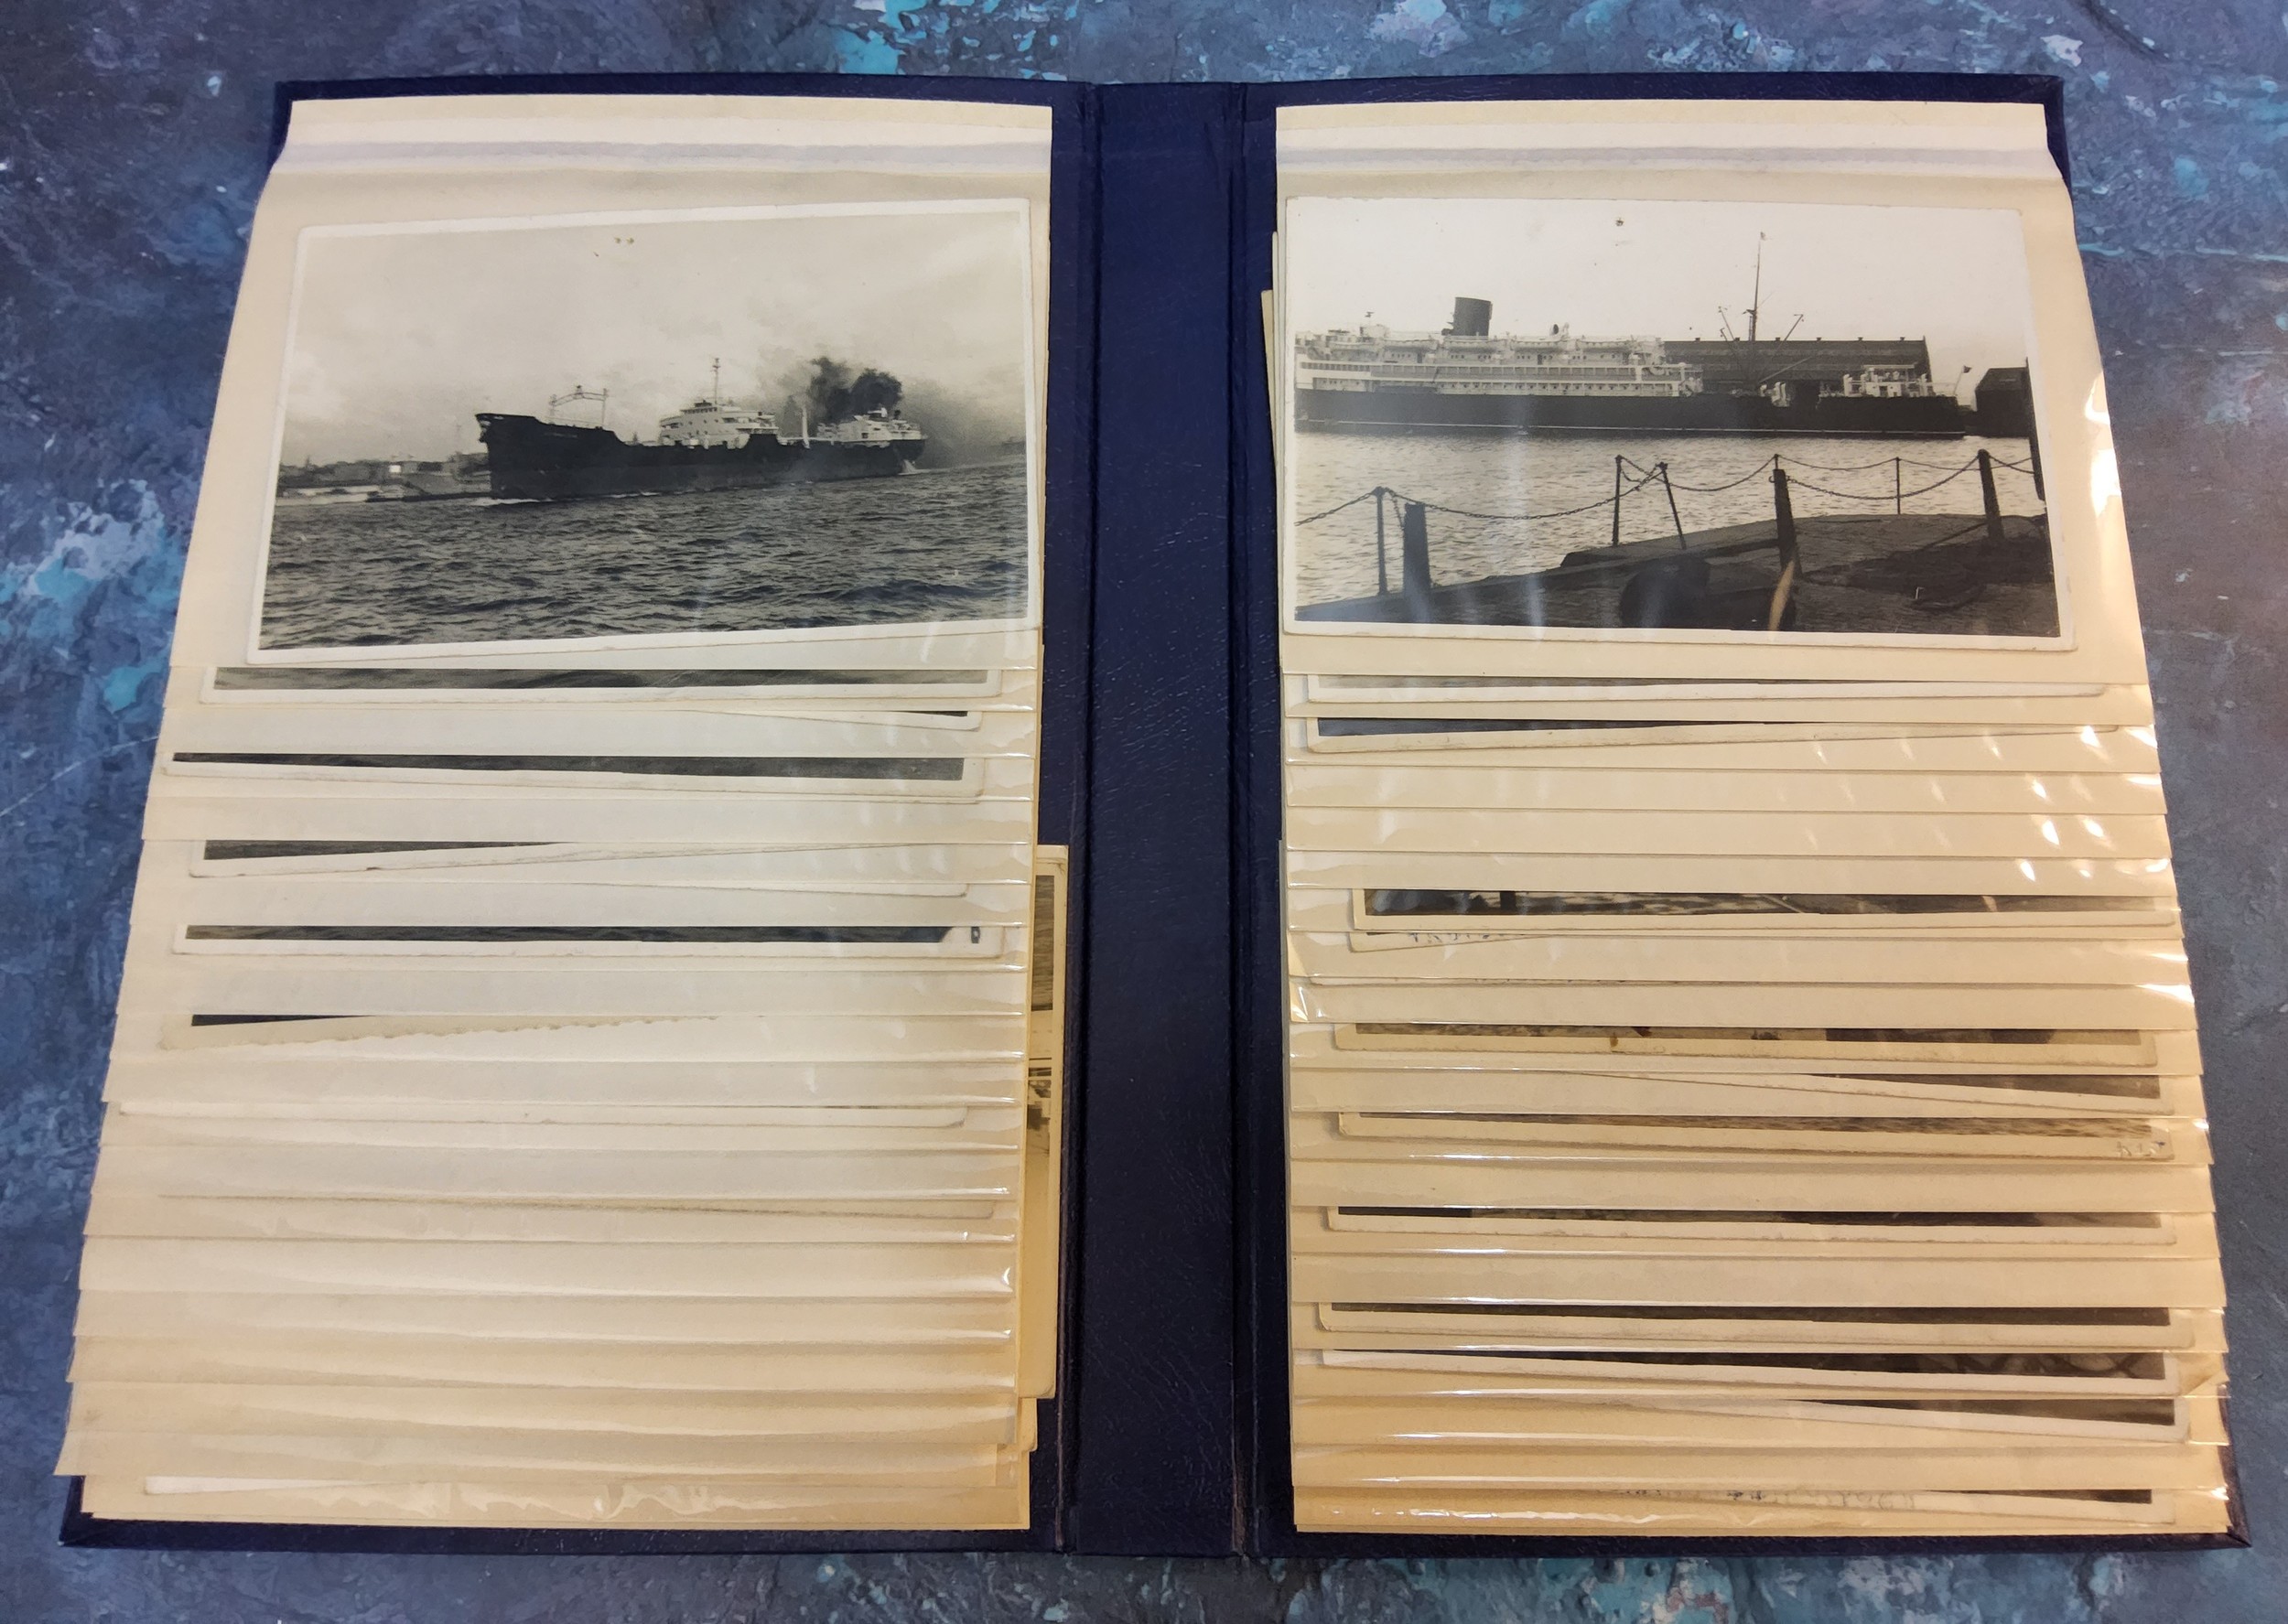 Nautical Interest & Photography  - An interesting photgraphy album of early 20th century black & - Image 3 of 3